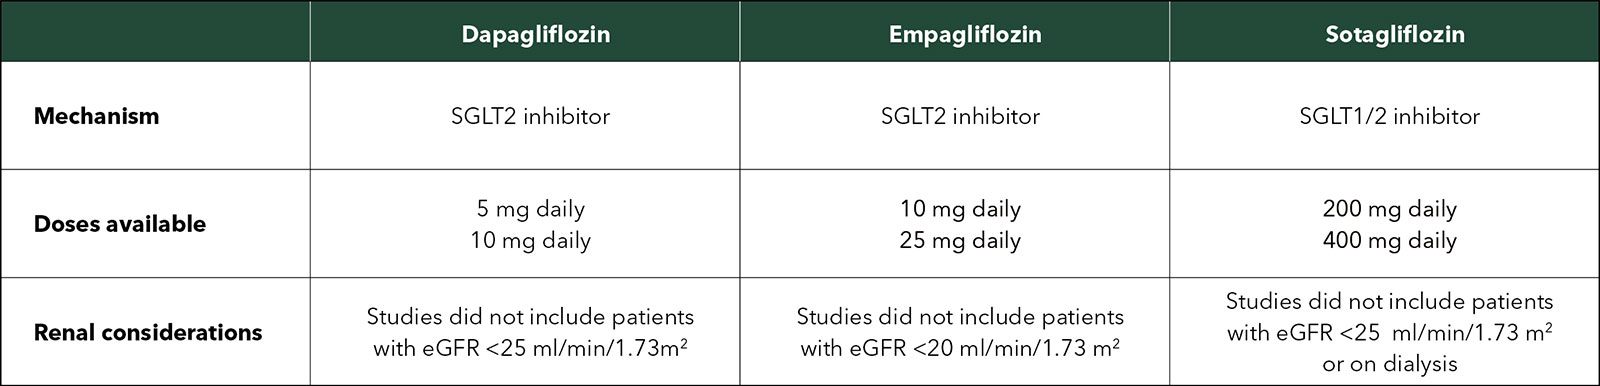 SGLT2 Inhibitors in Heart Failure: The EMPEROR DELIVERs His SOLO